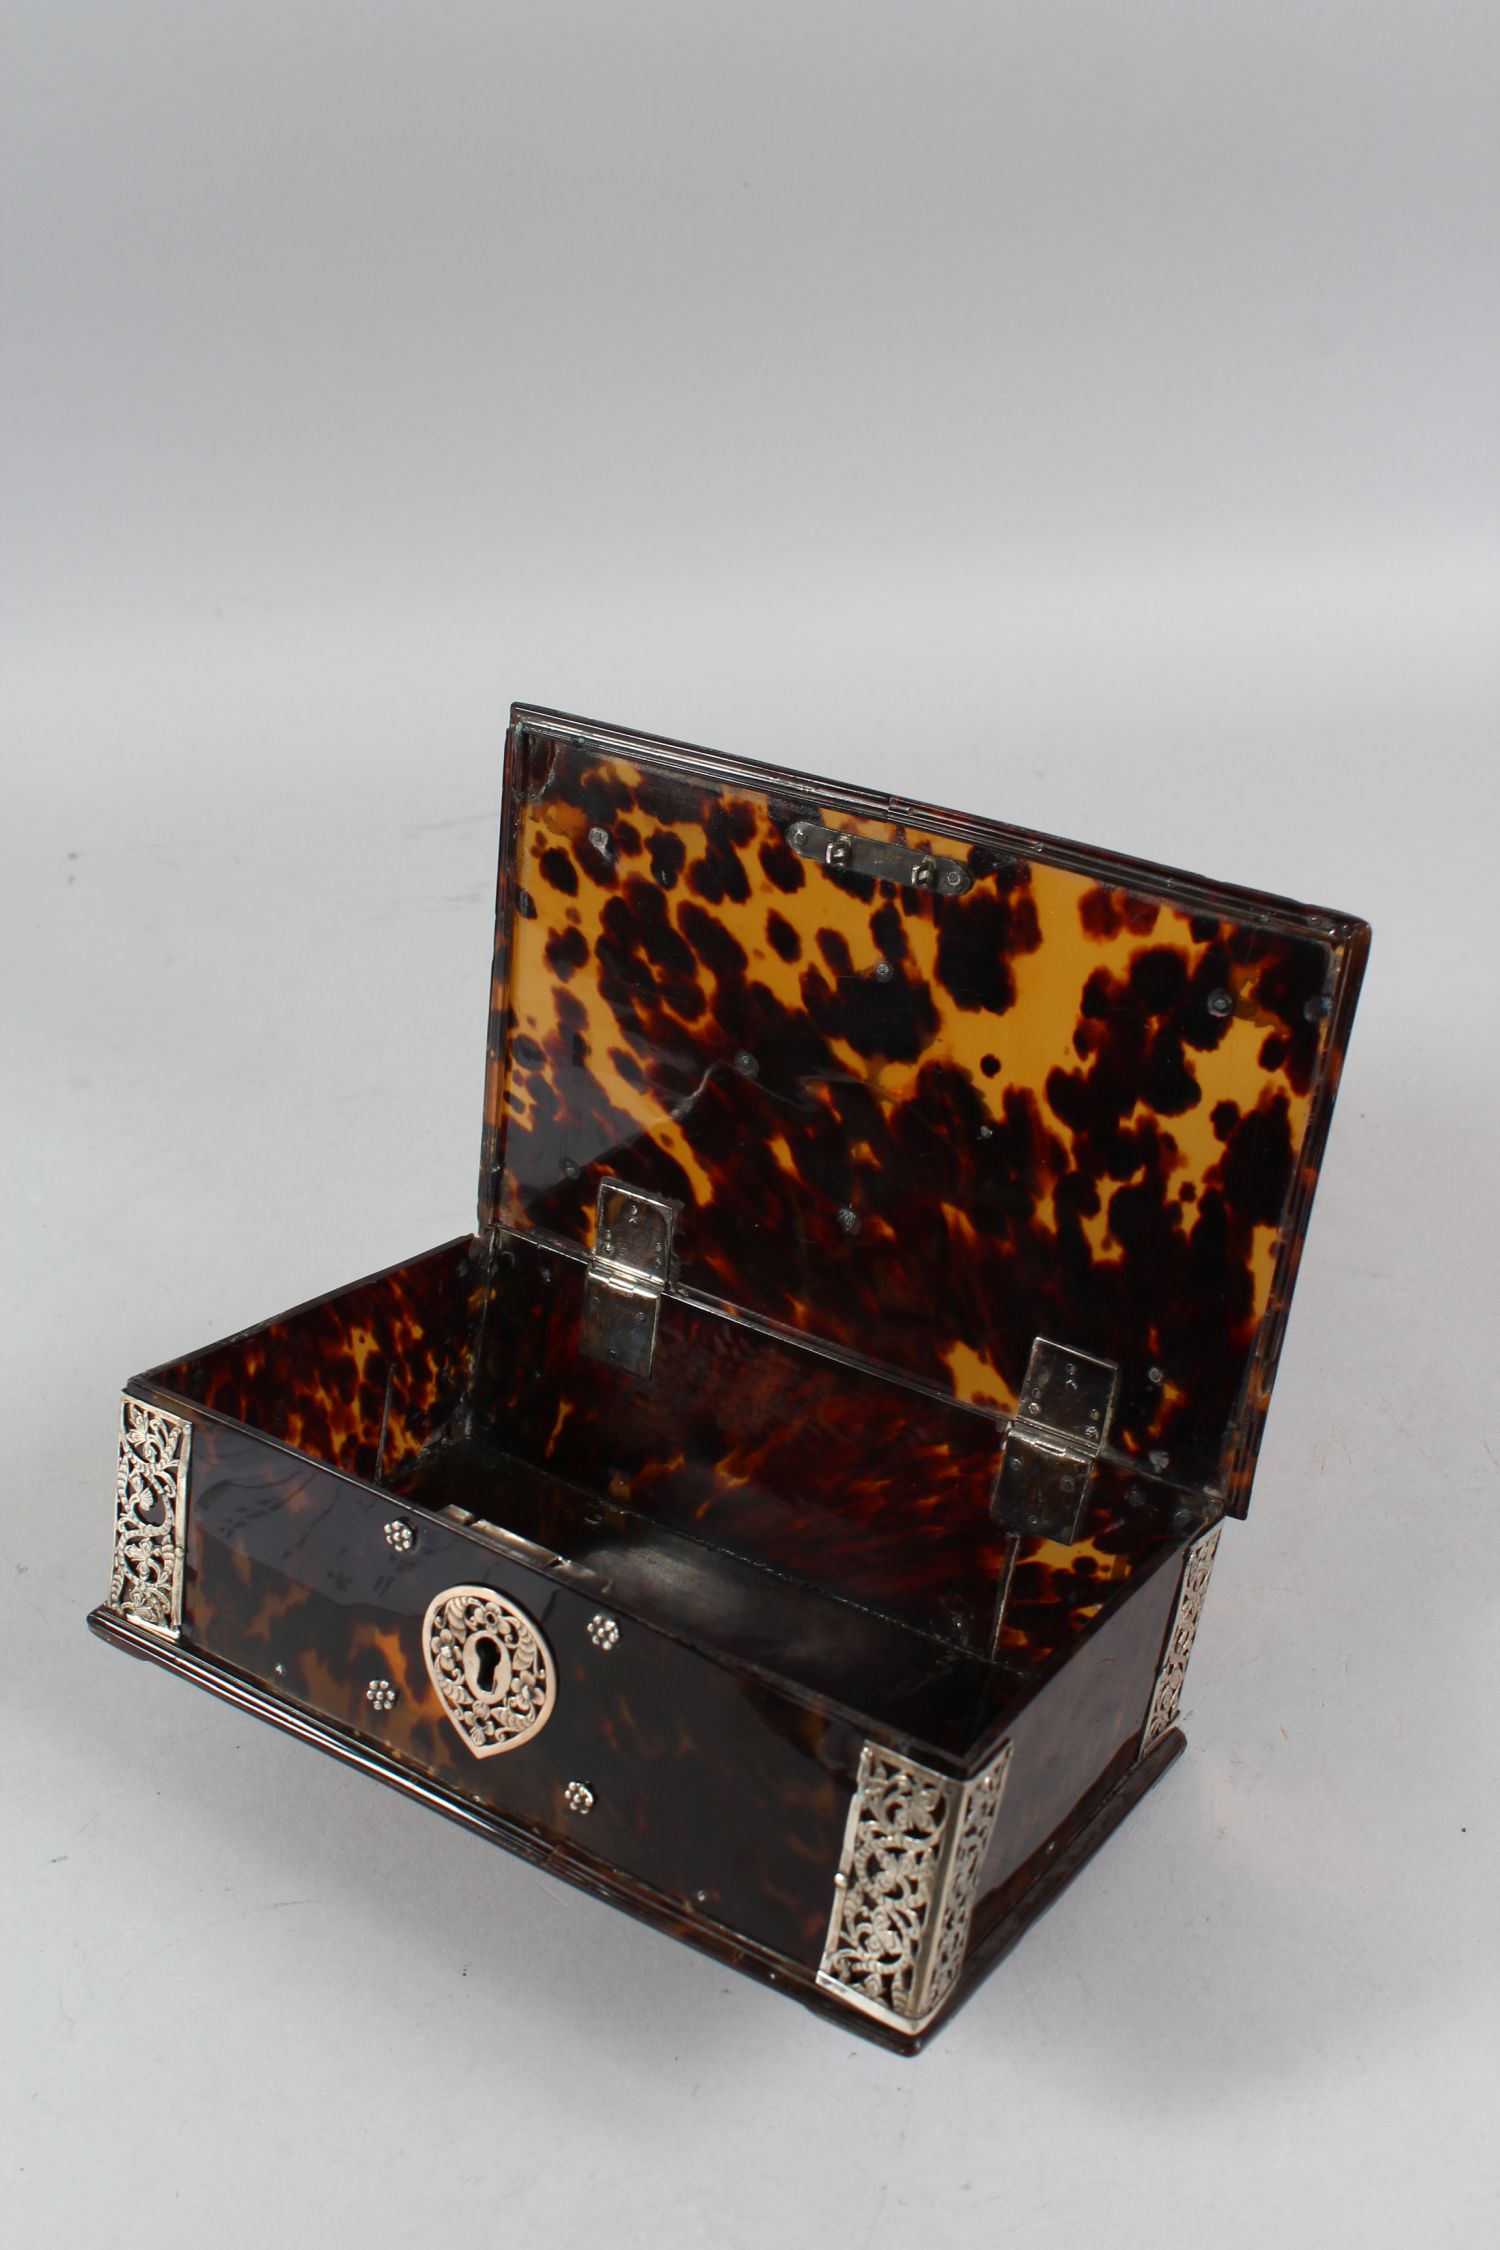 AN 18TH CENTURY DUTCH COLONIAL SRI LANKAN OR BATAVIAN SILVER MOUNTED TORTOISESHELL BOX with silver - Image 6 of 6